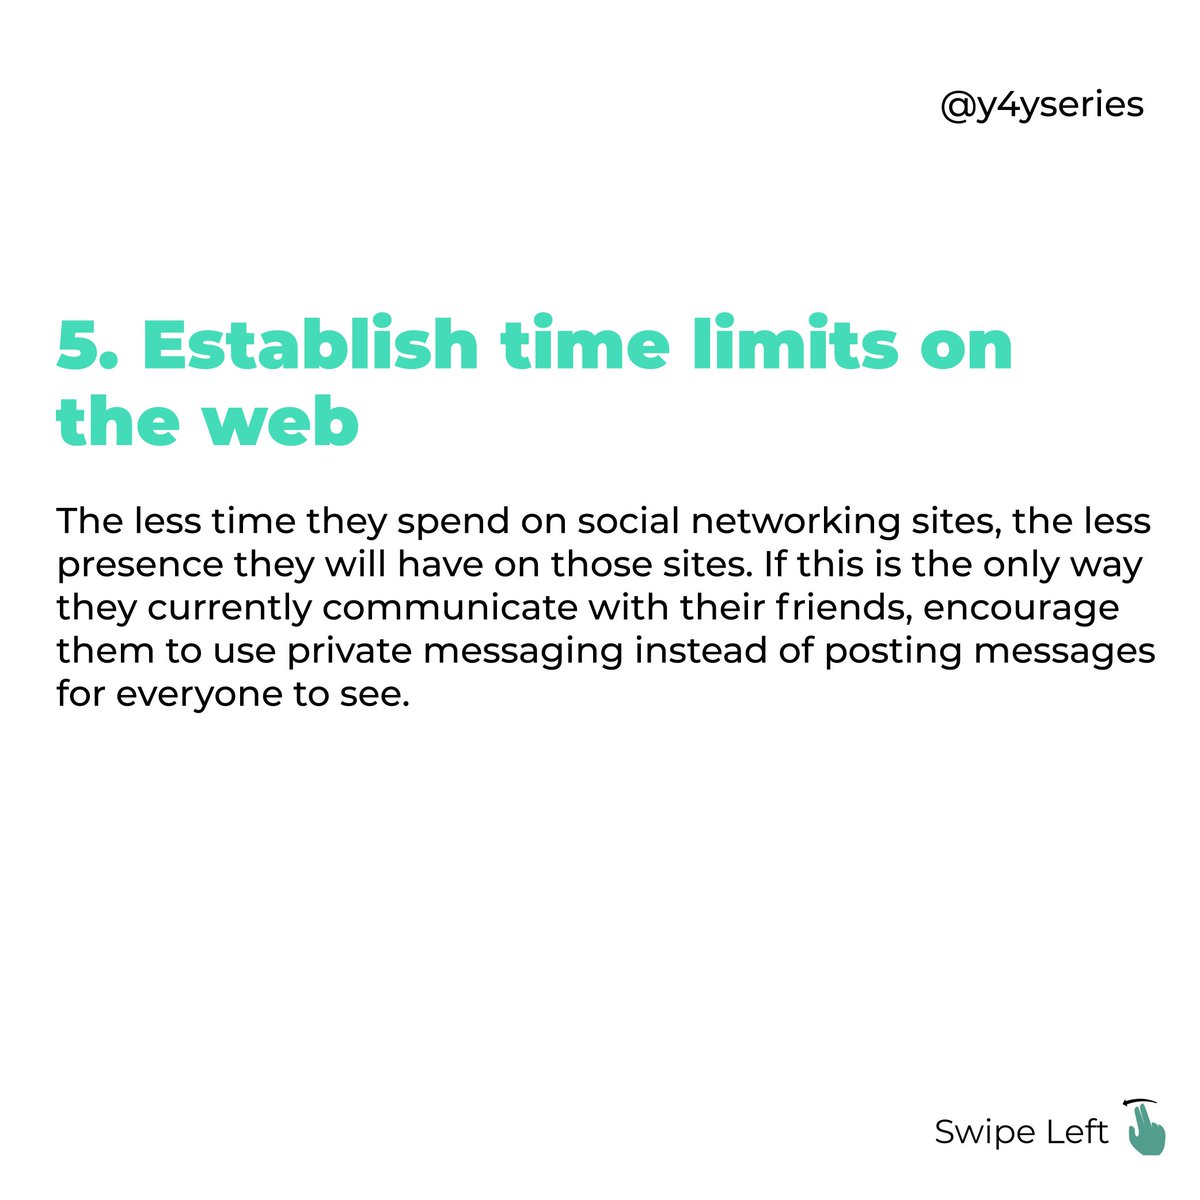 Establish time limits on the web:⁣The less time they spend on social networking sites, the less presence they will have on those sites. Encourage your kids to use private messaging instead of posting messages for everyone to see.⁣